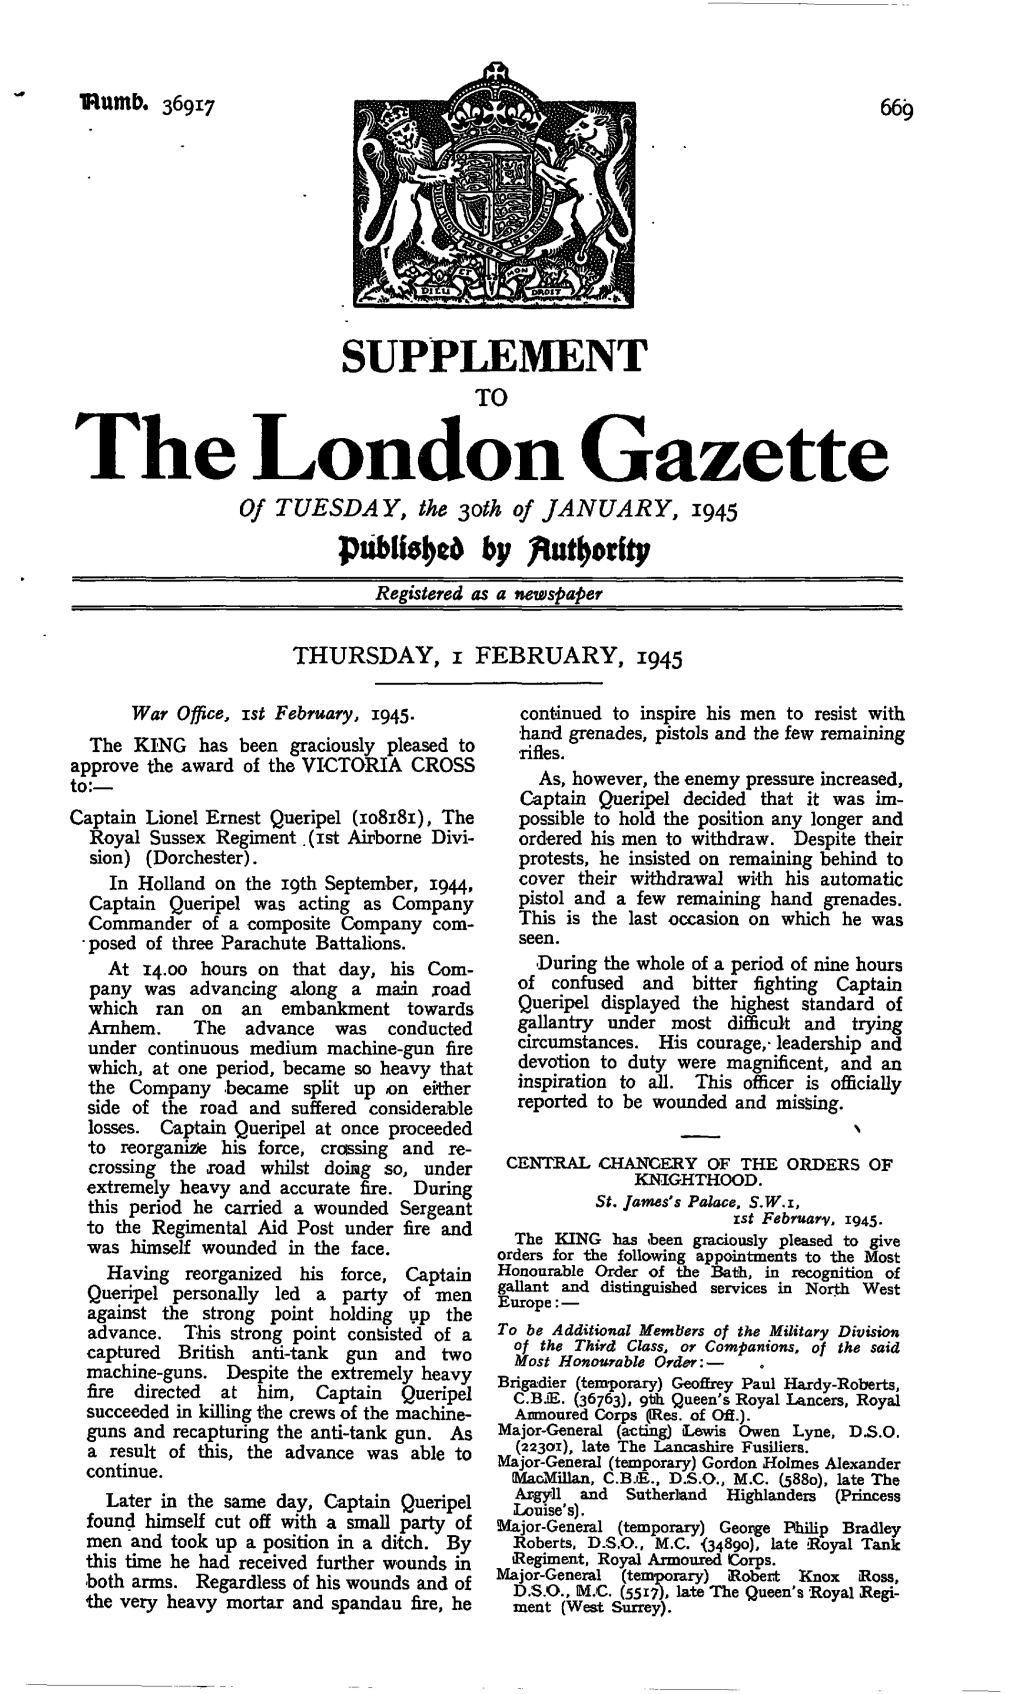 The London Gazette of TUESDAY, the $Oth of JANUARY, 1945 by /Tafyorfty Registered As a Newspaper